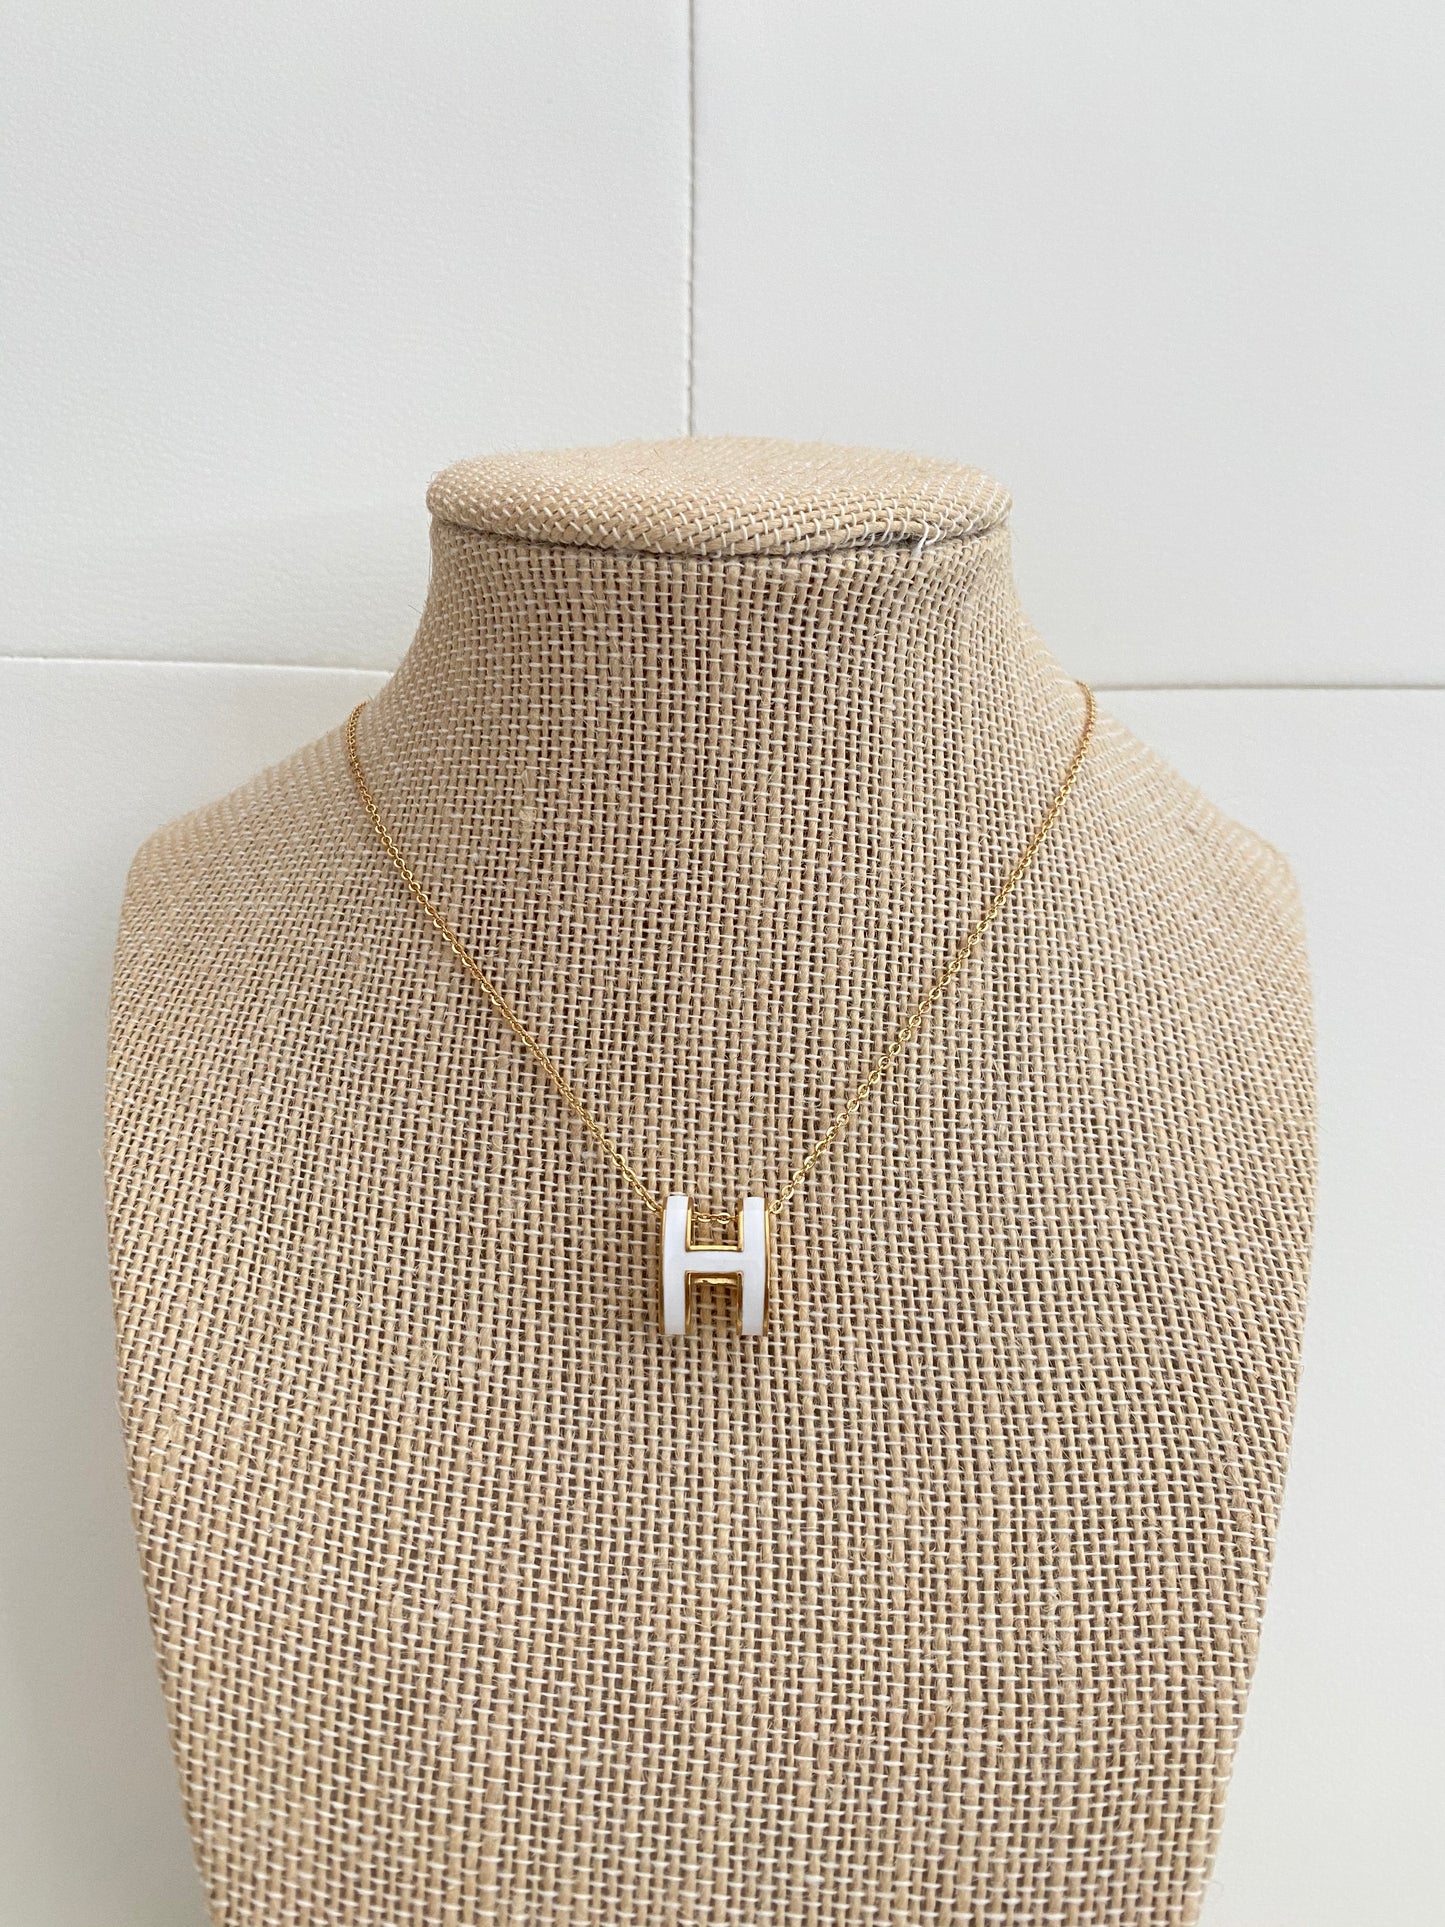 White H necklace